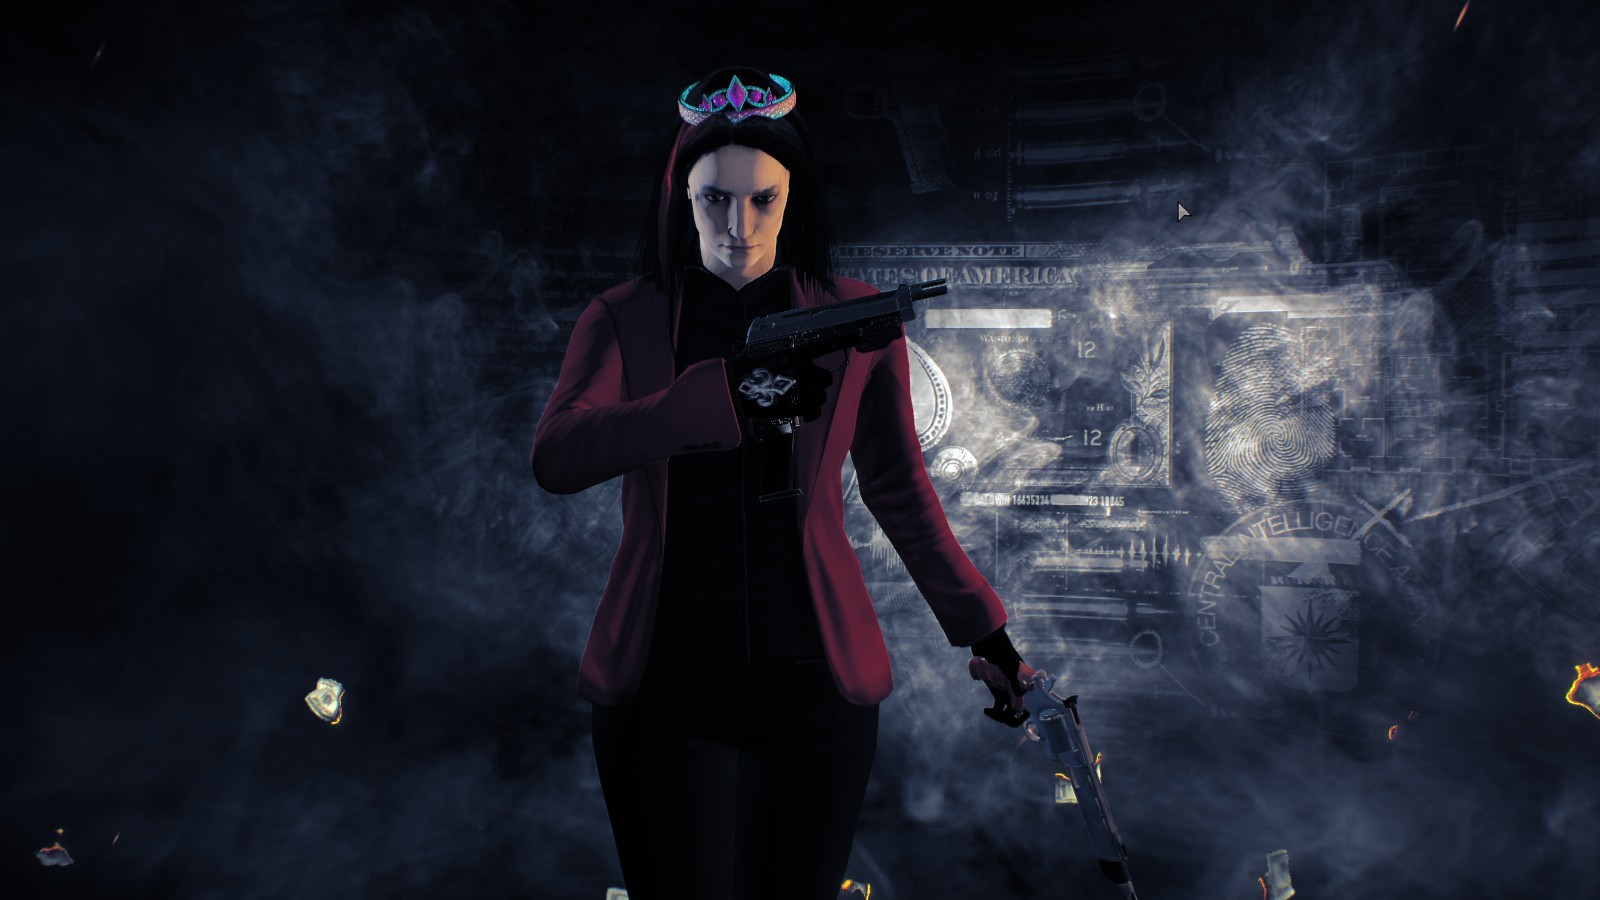 Sydney character payday 2 фото 93